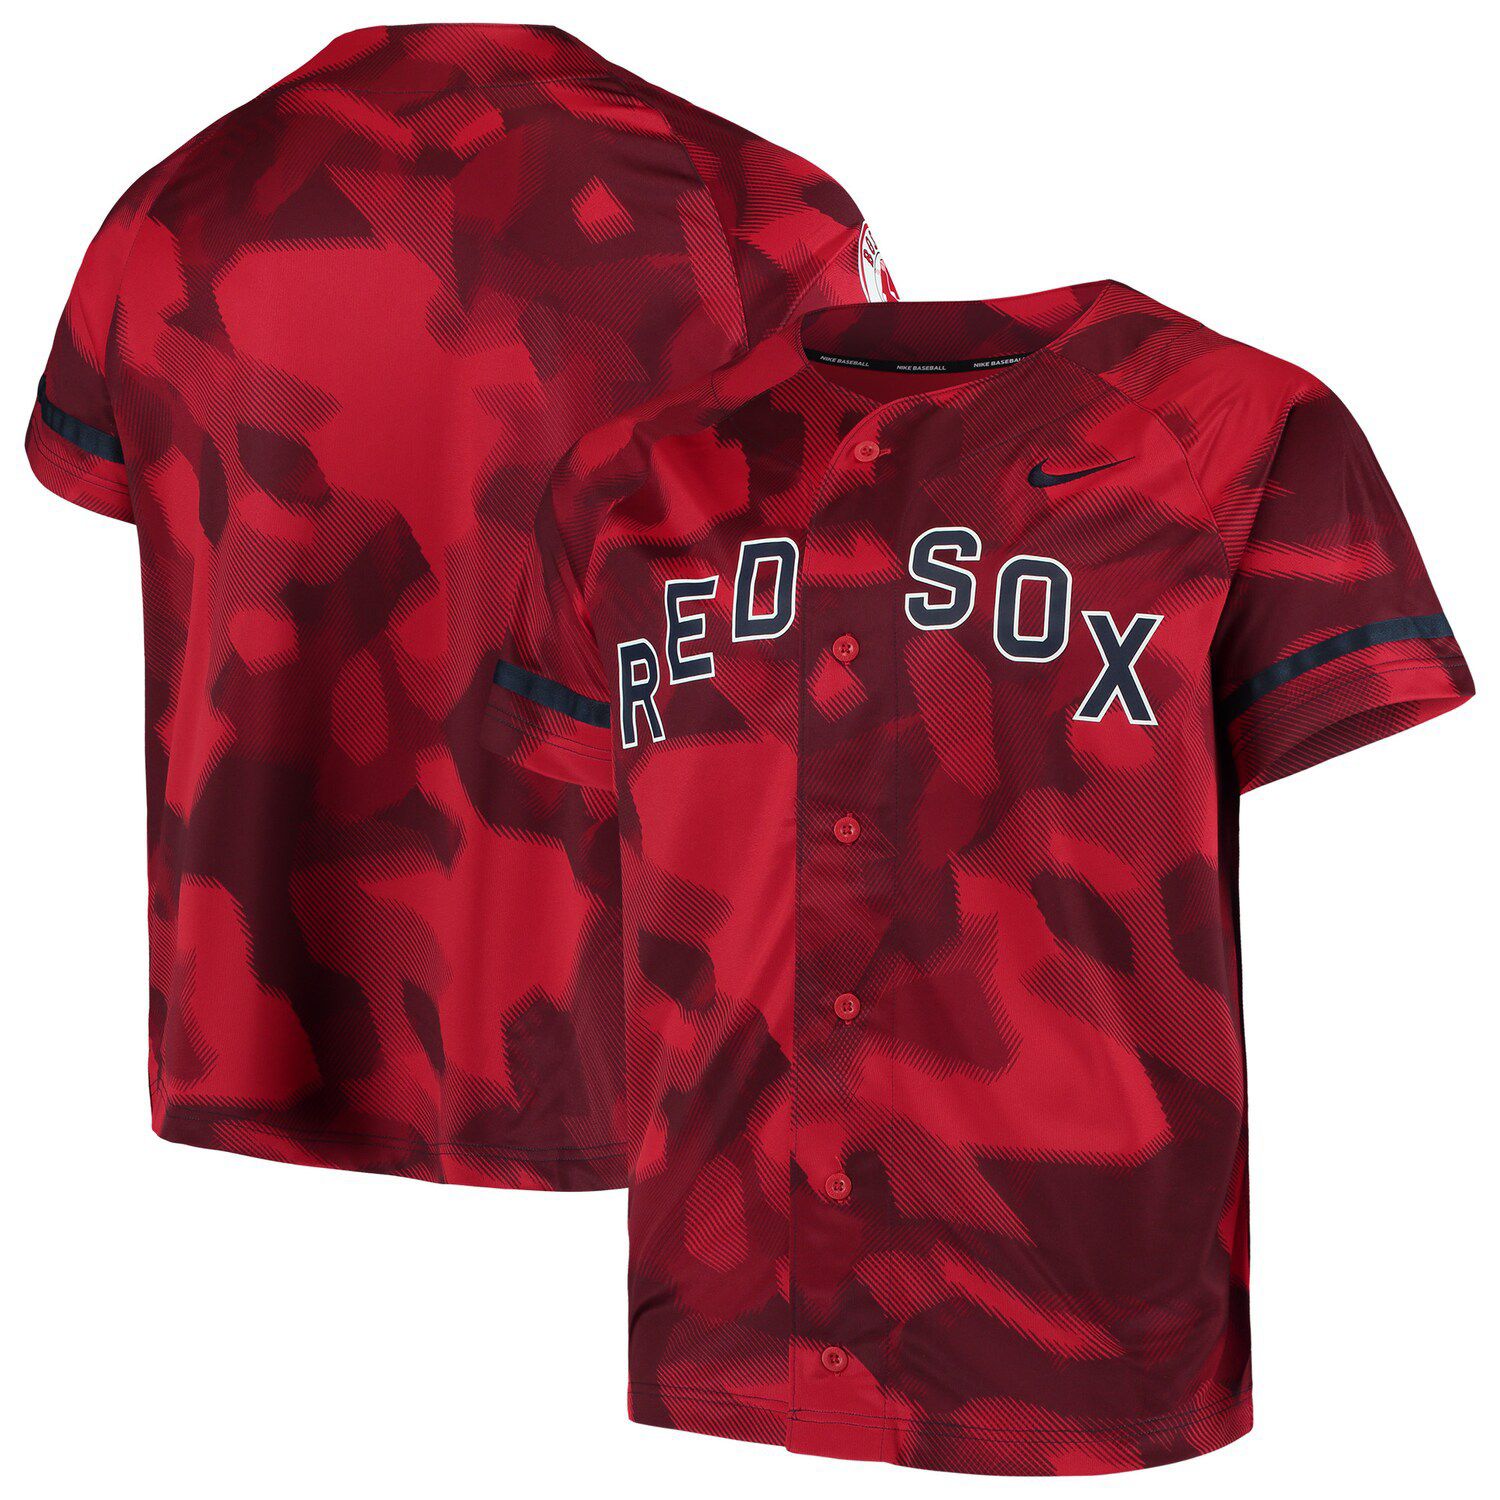 Men's Nike Red Boston Red Sox Camo Jersey